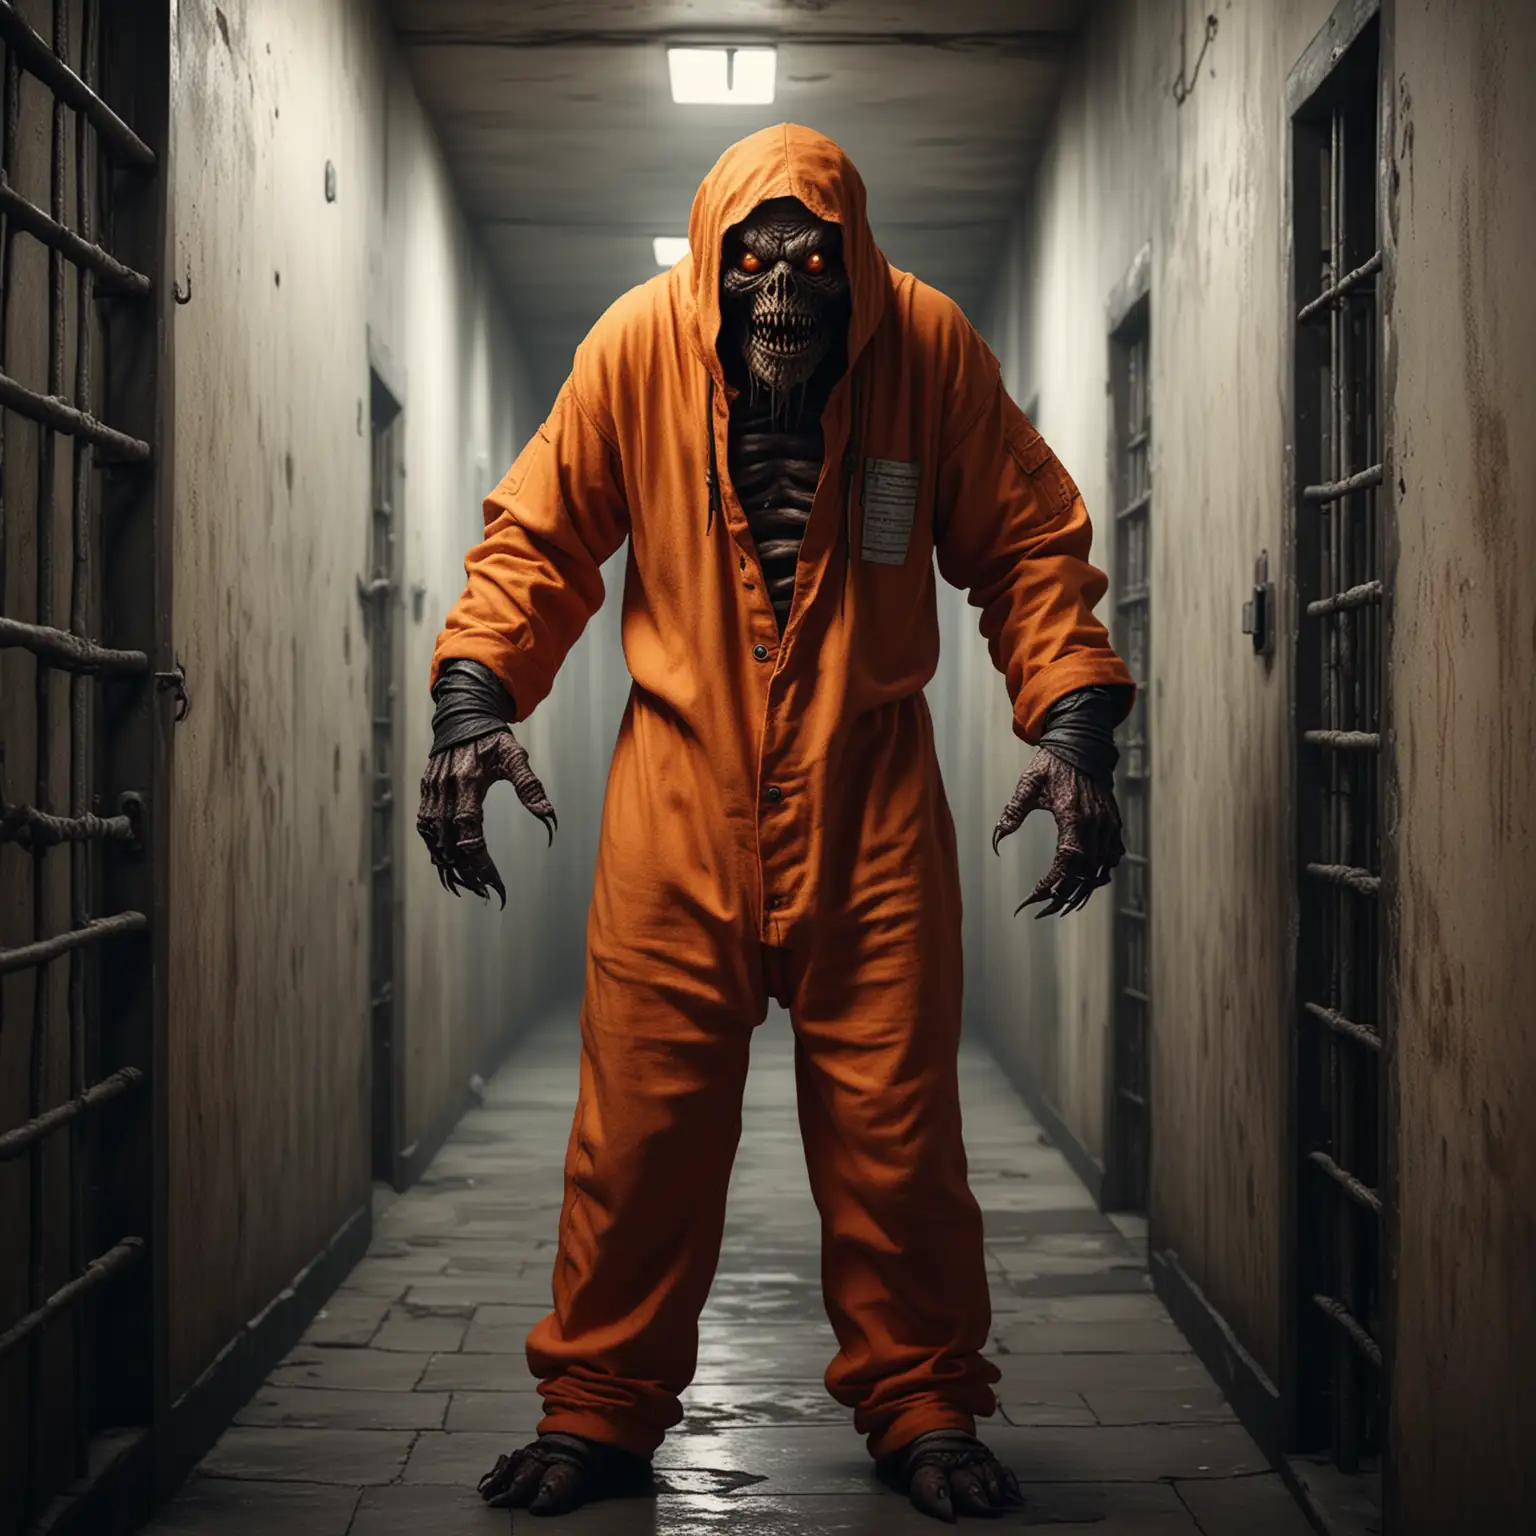 terryfic monster creature in orange prisoner clothes stands in the prison corridor. hyper realistic. horror atmosphere. Close-up shot
